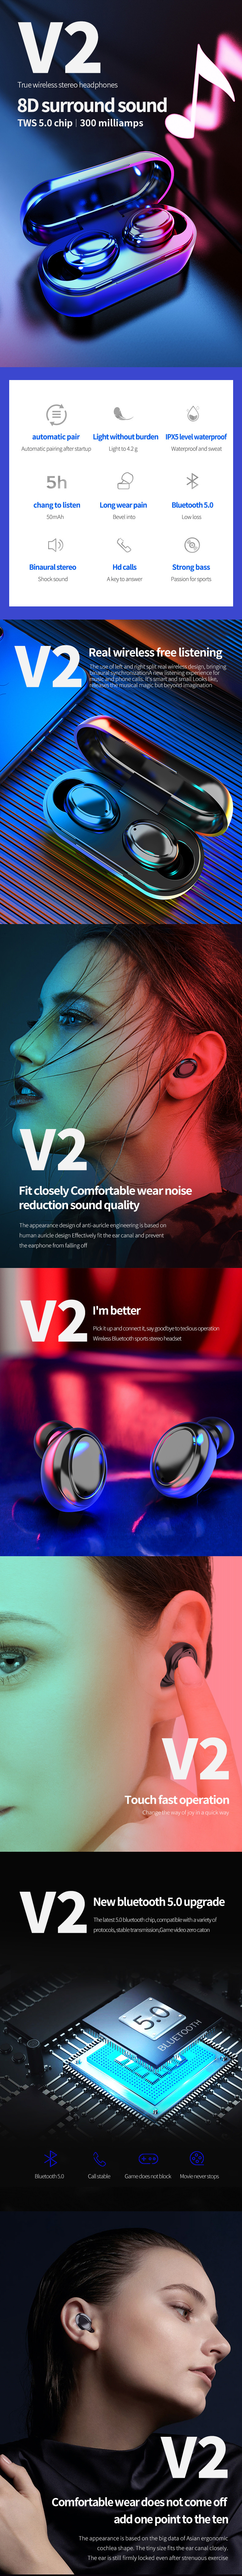 V2-TWS-Dynamic-bluetooth-50-Wireless-Stereo-Earbuds-Noise-Cancelling-Touch-Control-In-Ear-Earphone-w-1698848-1